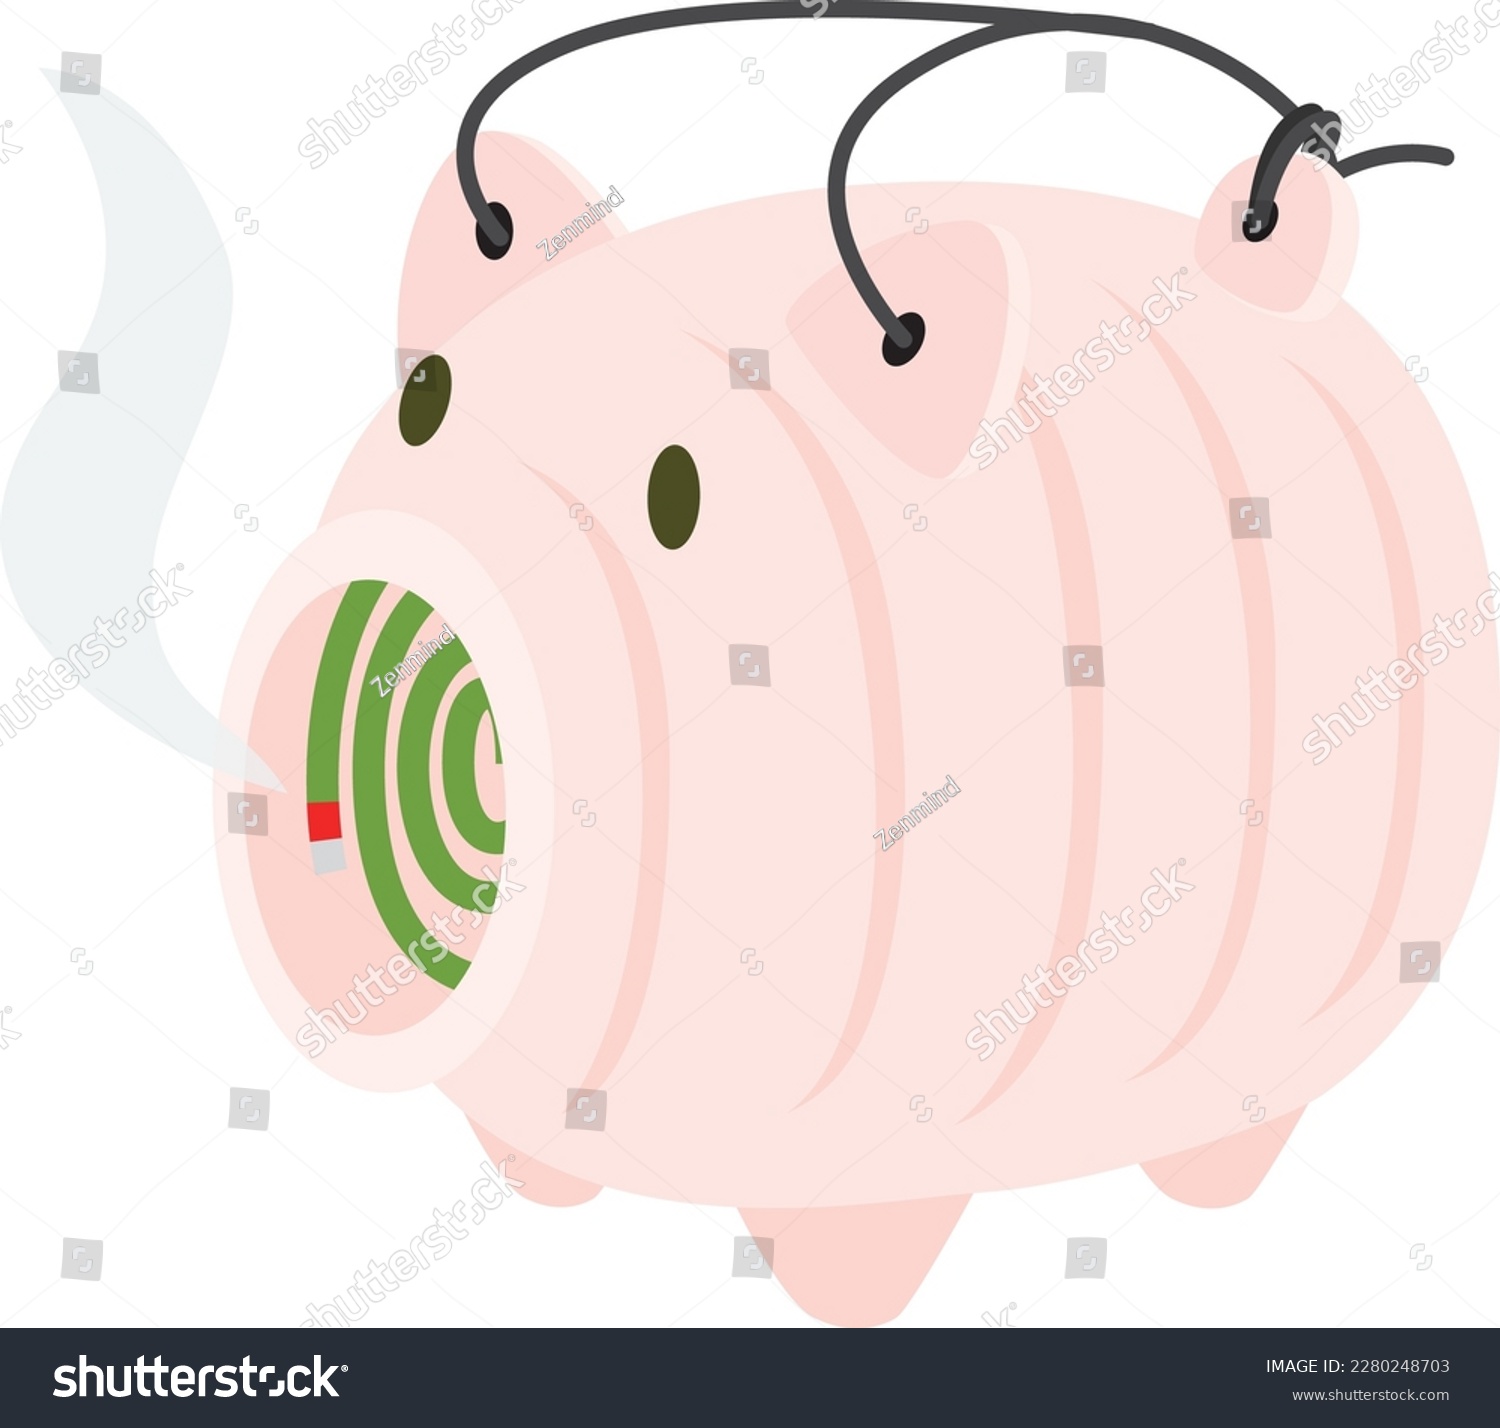 SVG of Mosquito collecting pig. Vector illustration of pig-shaped mosquito coil holder. svg